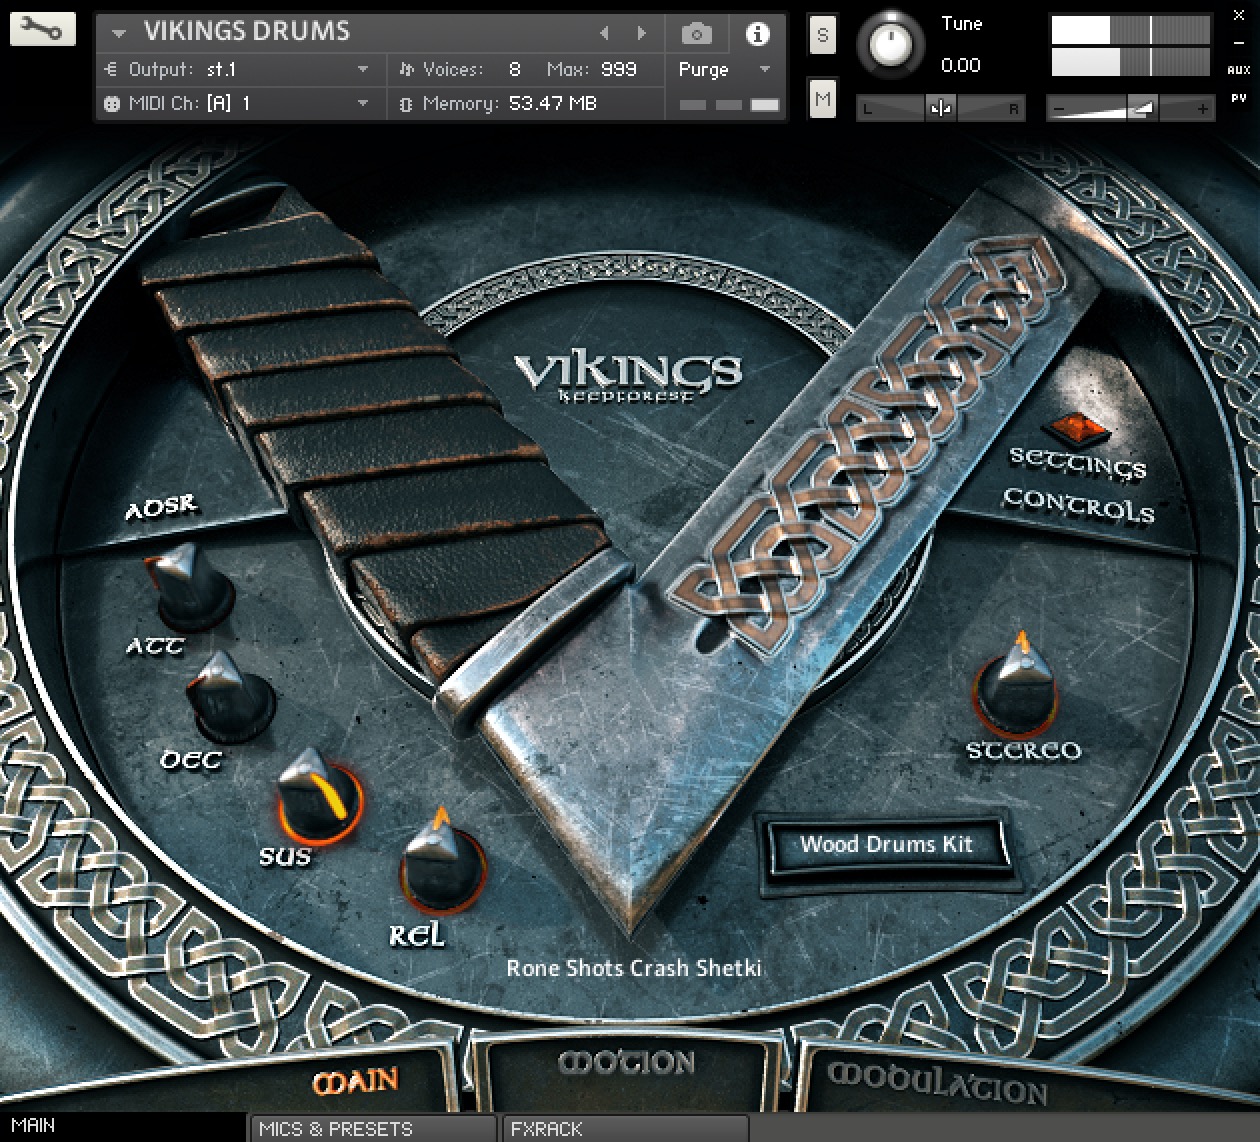 Vikings Bundle by KeepForest Review